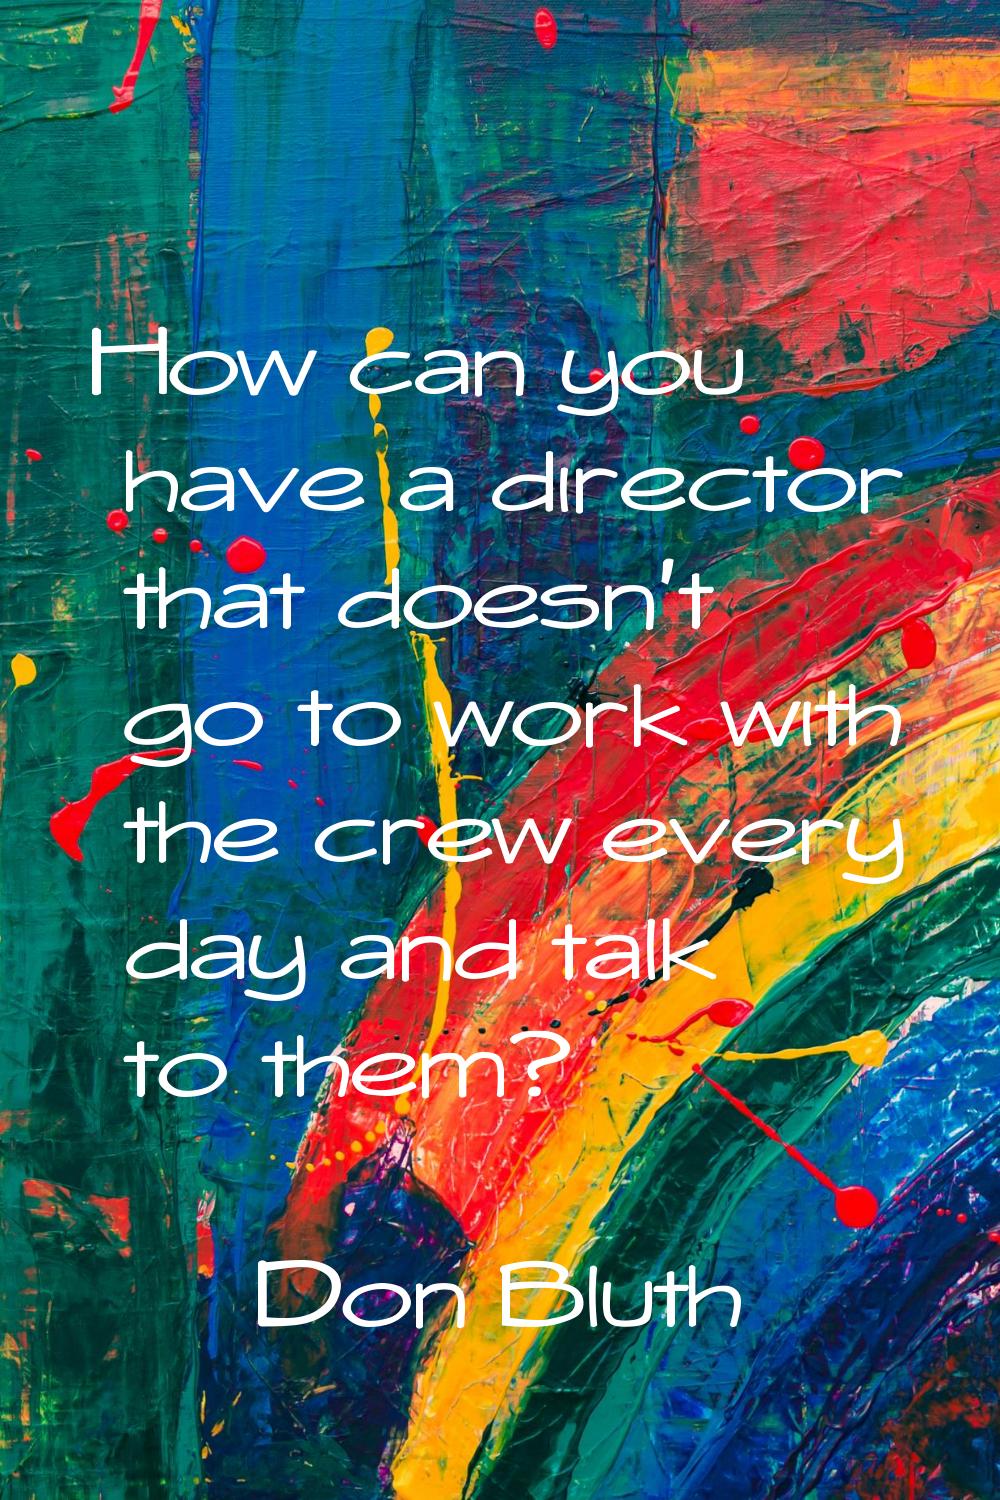 How can you have a director that doesn't go to work with the crew every day and talk to them?